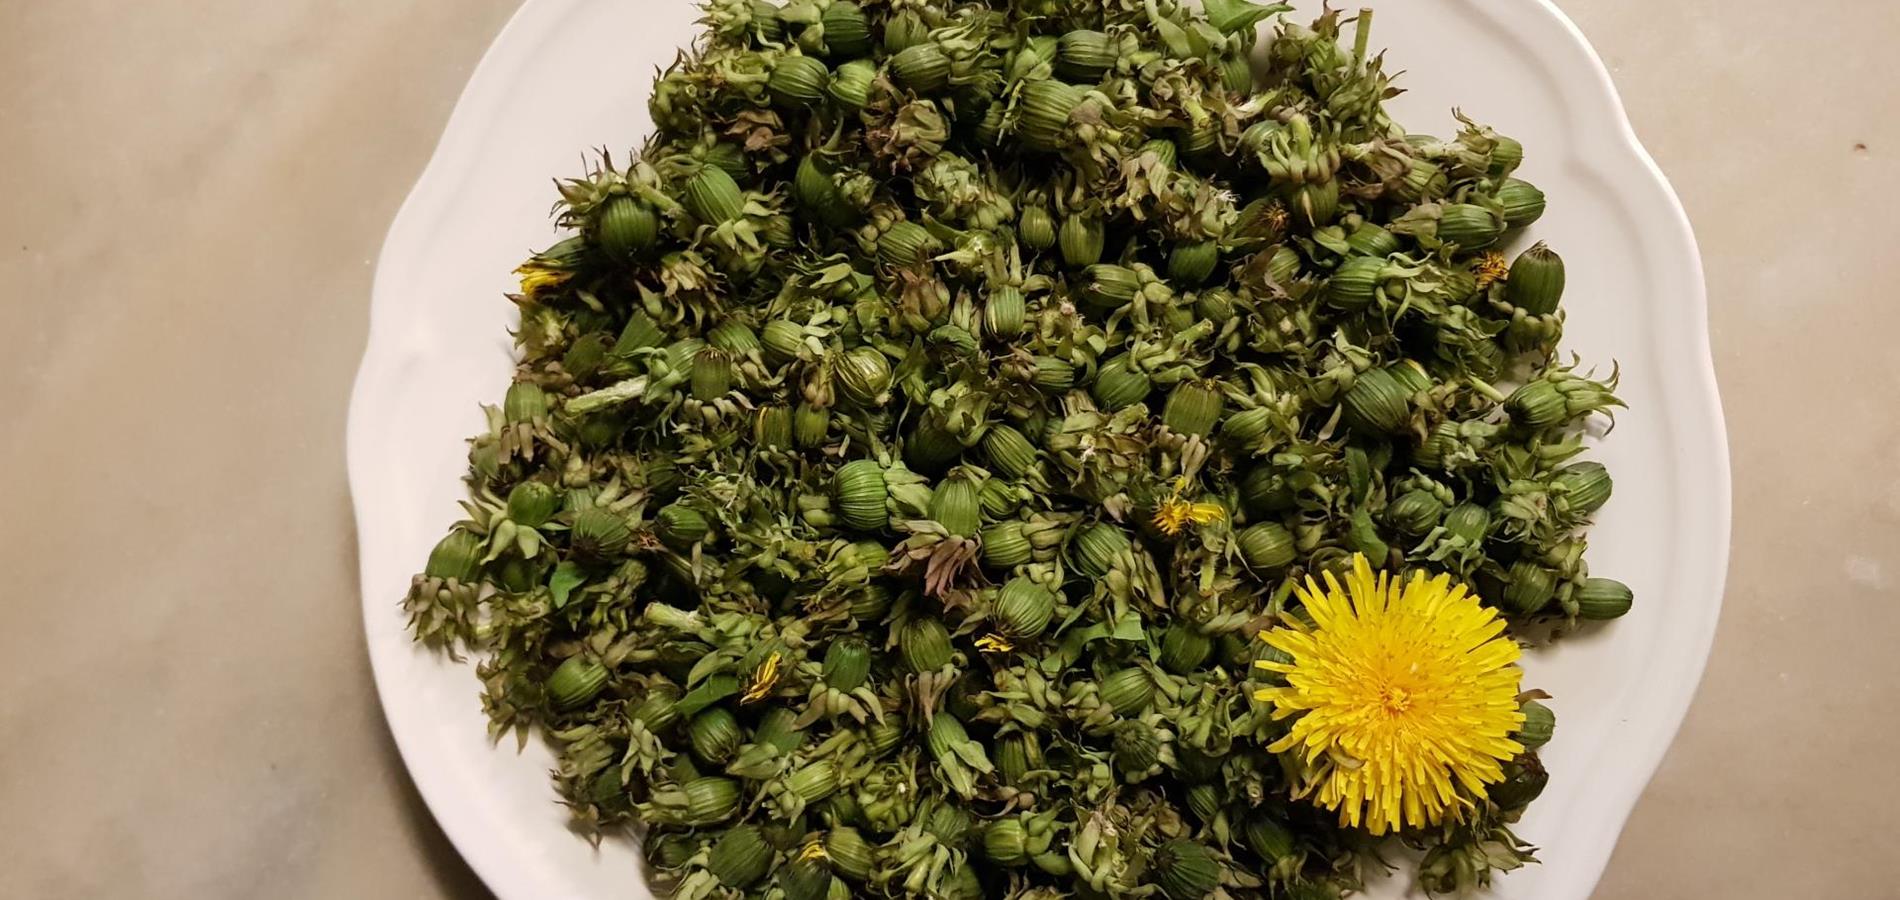 Pickled dandelion capers